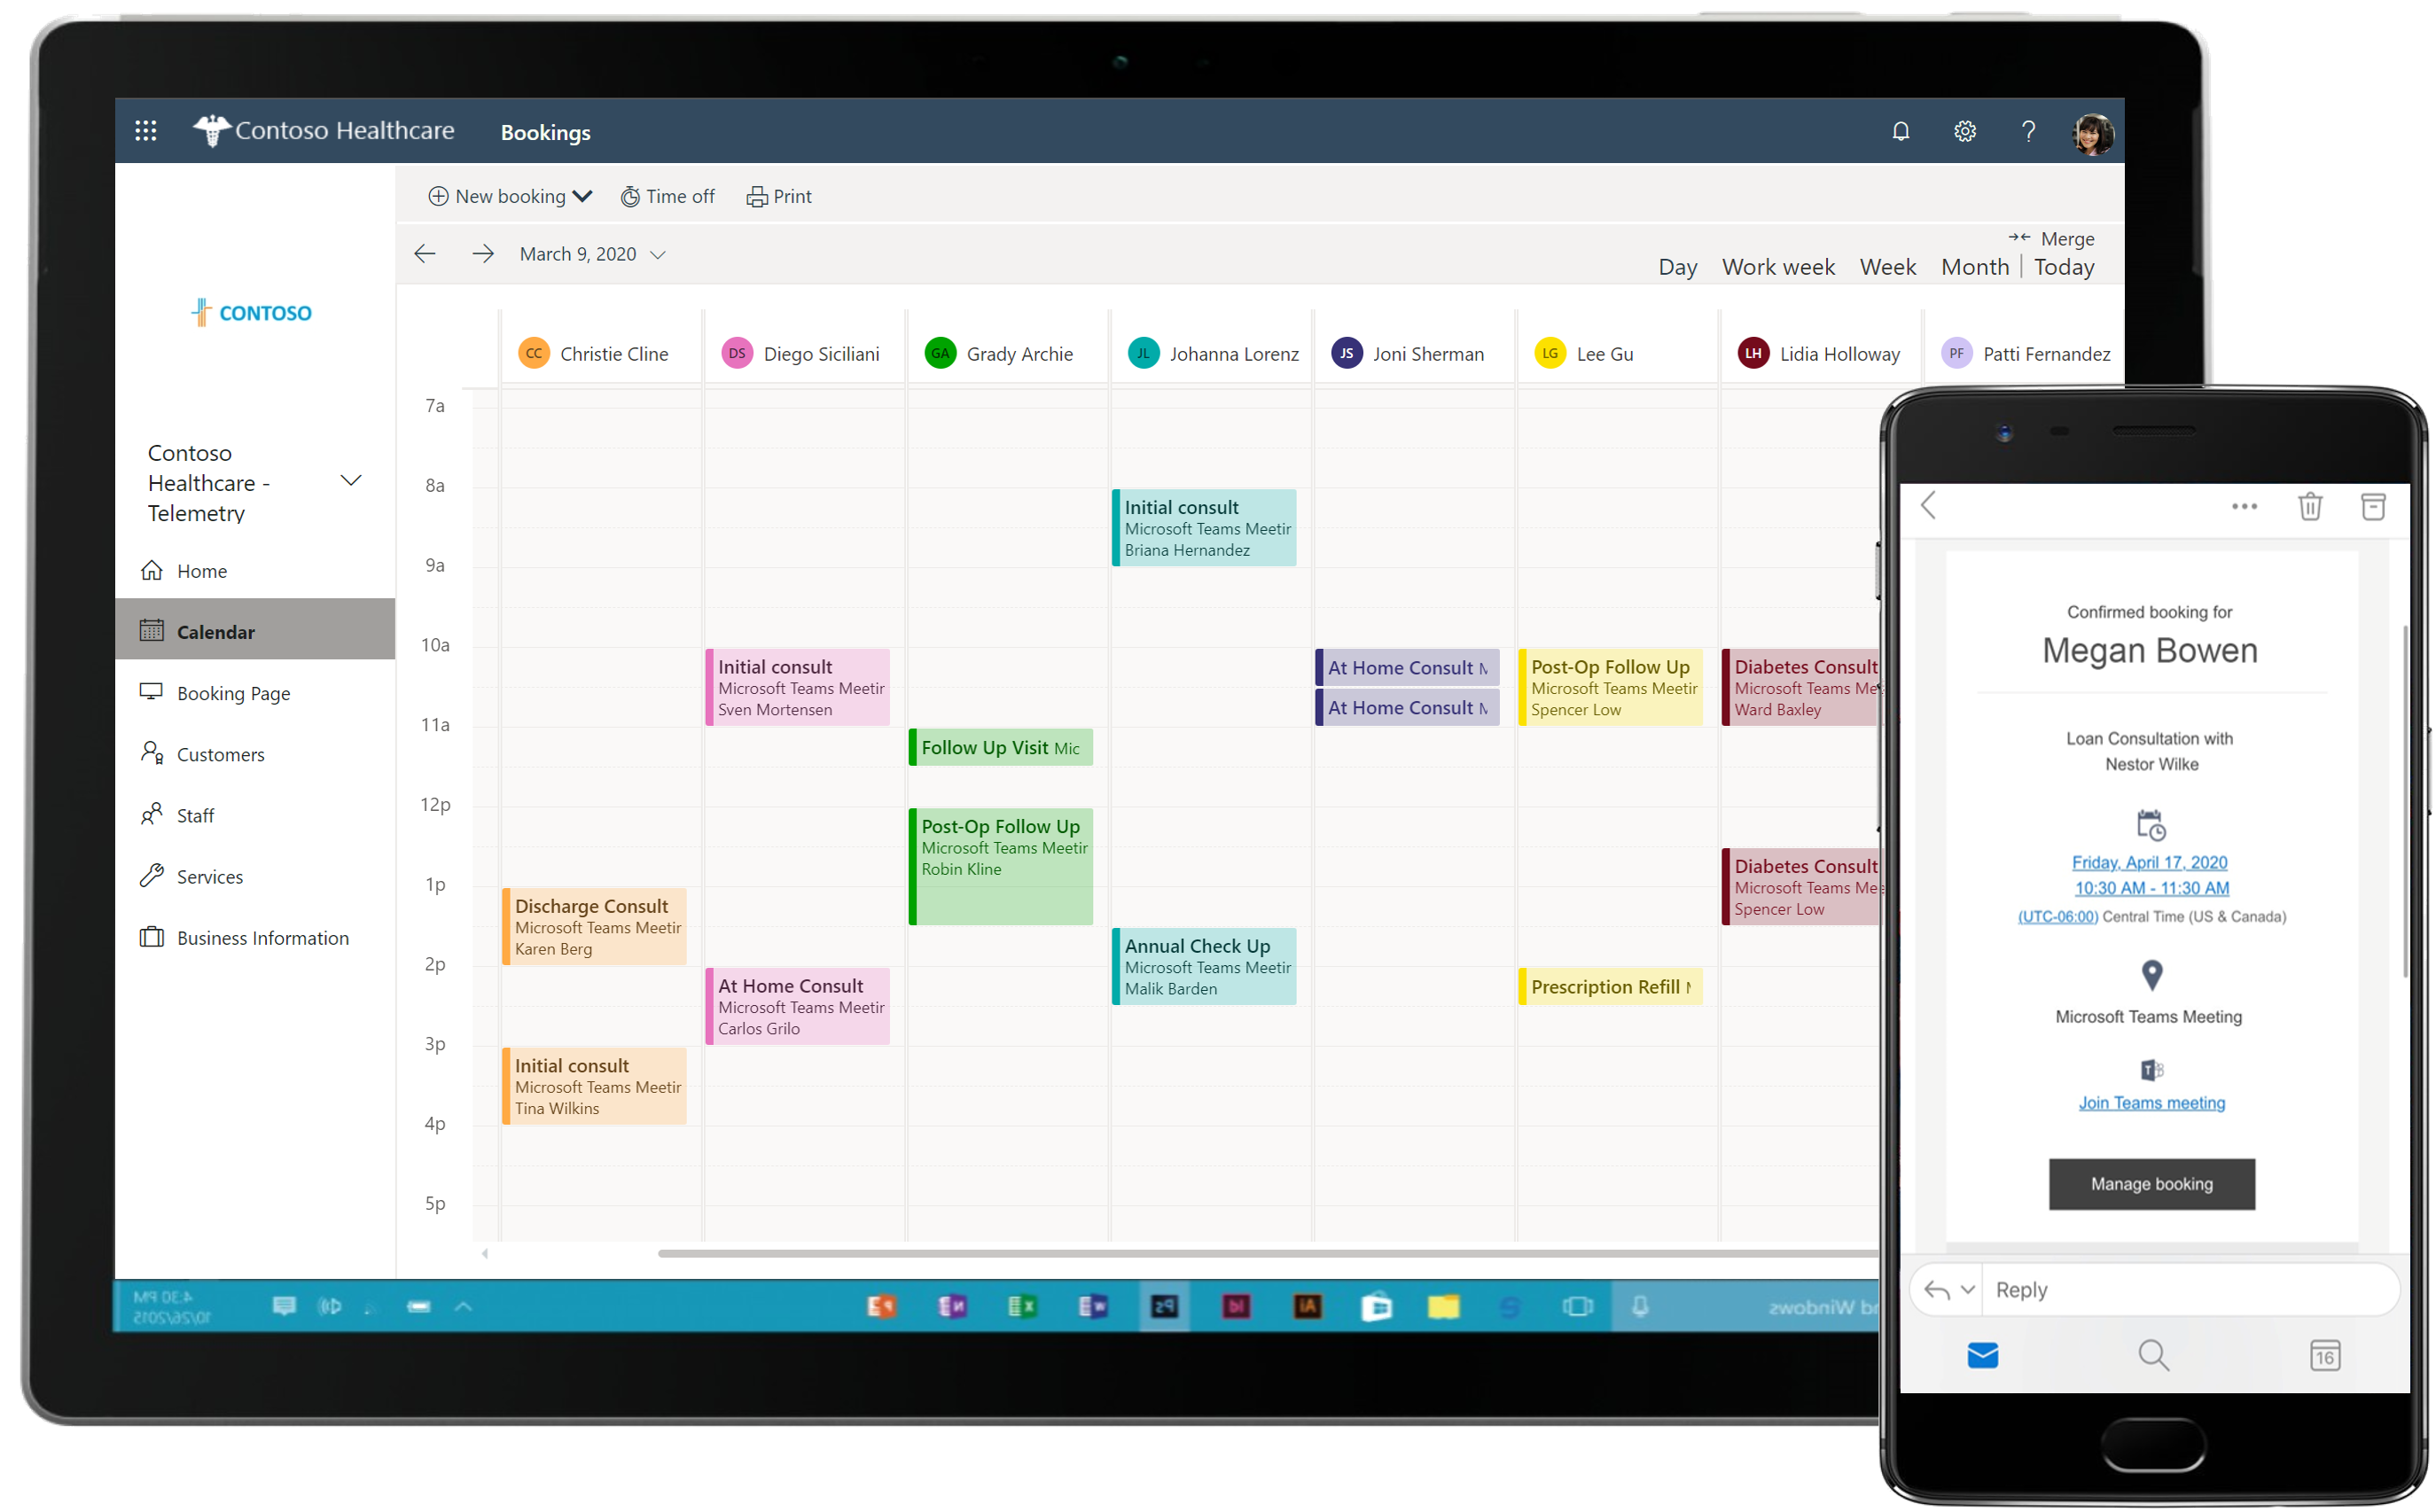 Screenshot showing the calendar within the Bookings work management tool and the ability to access it across multiple devices.